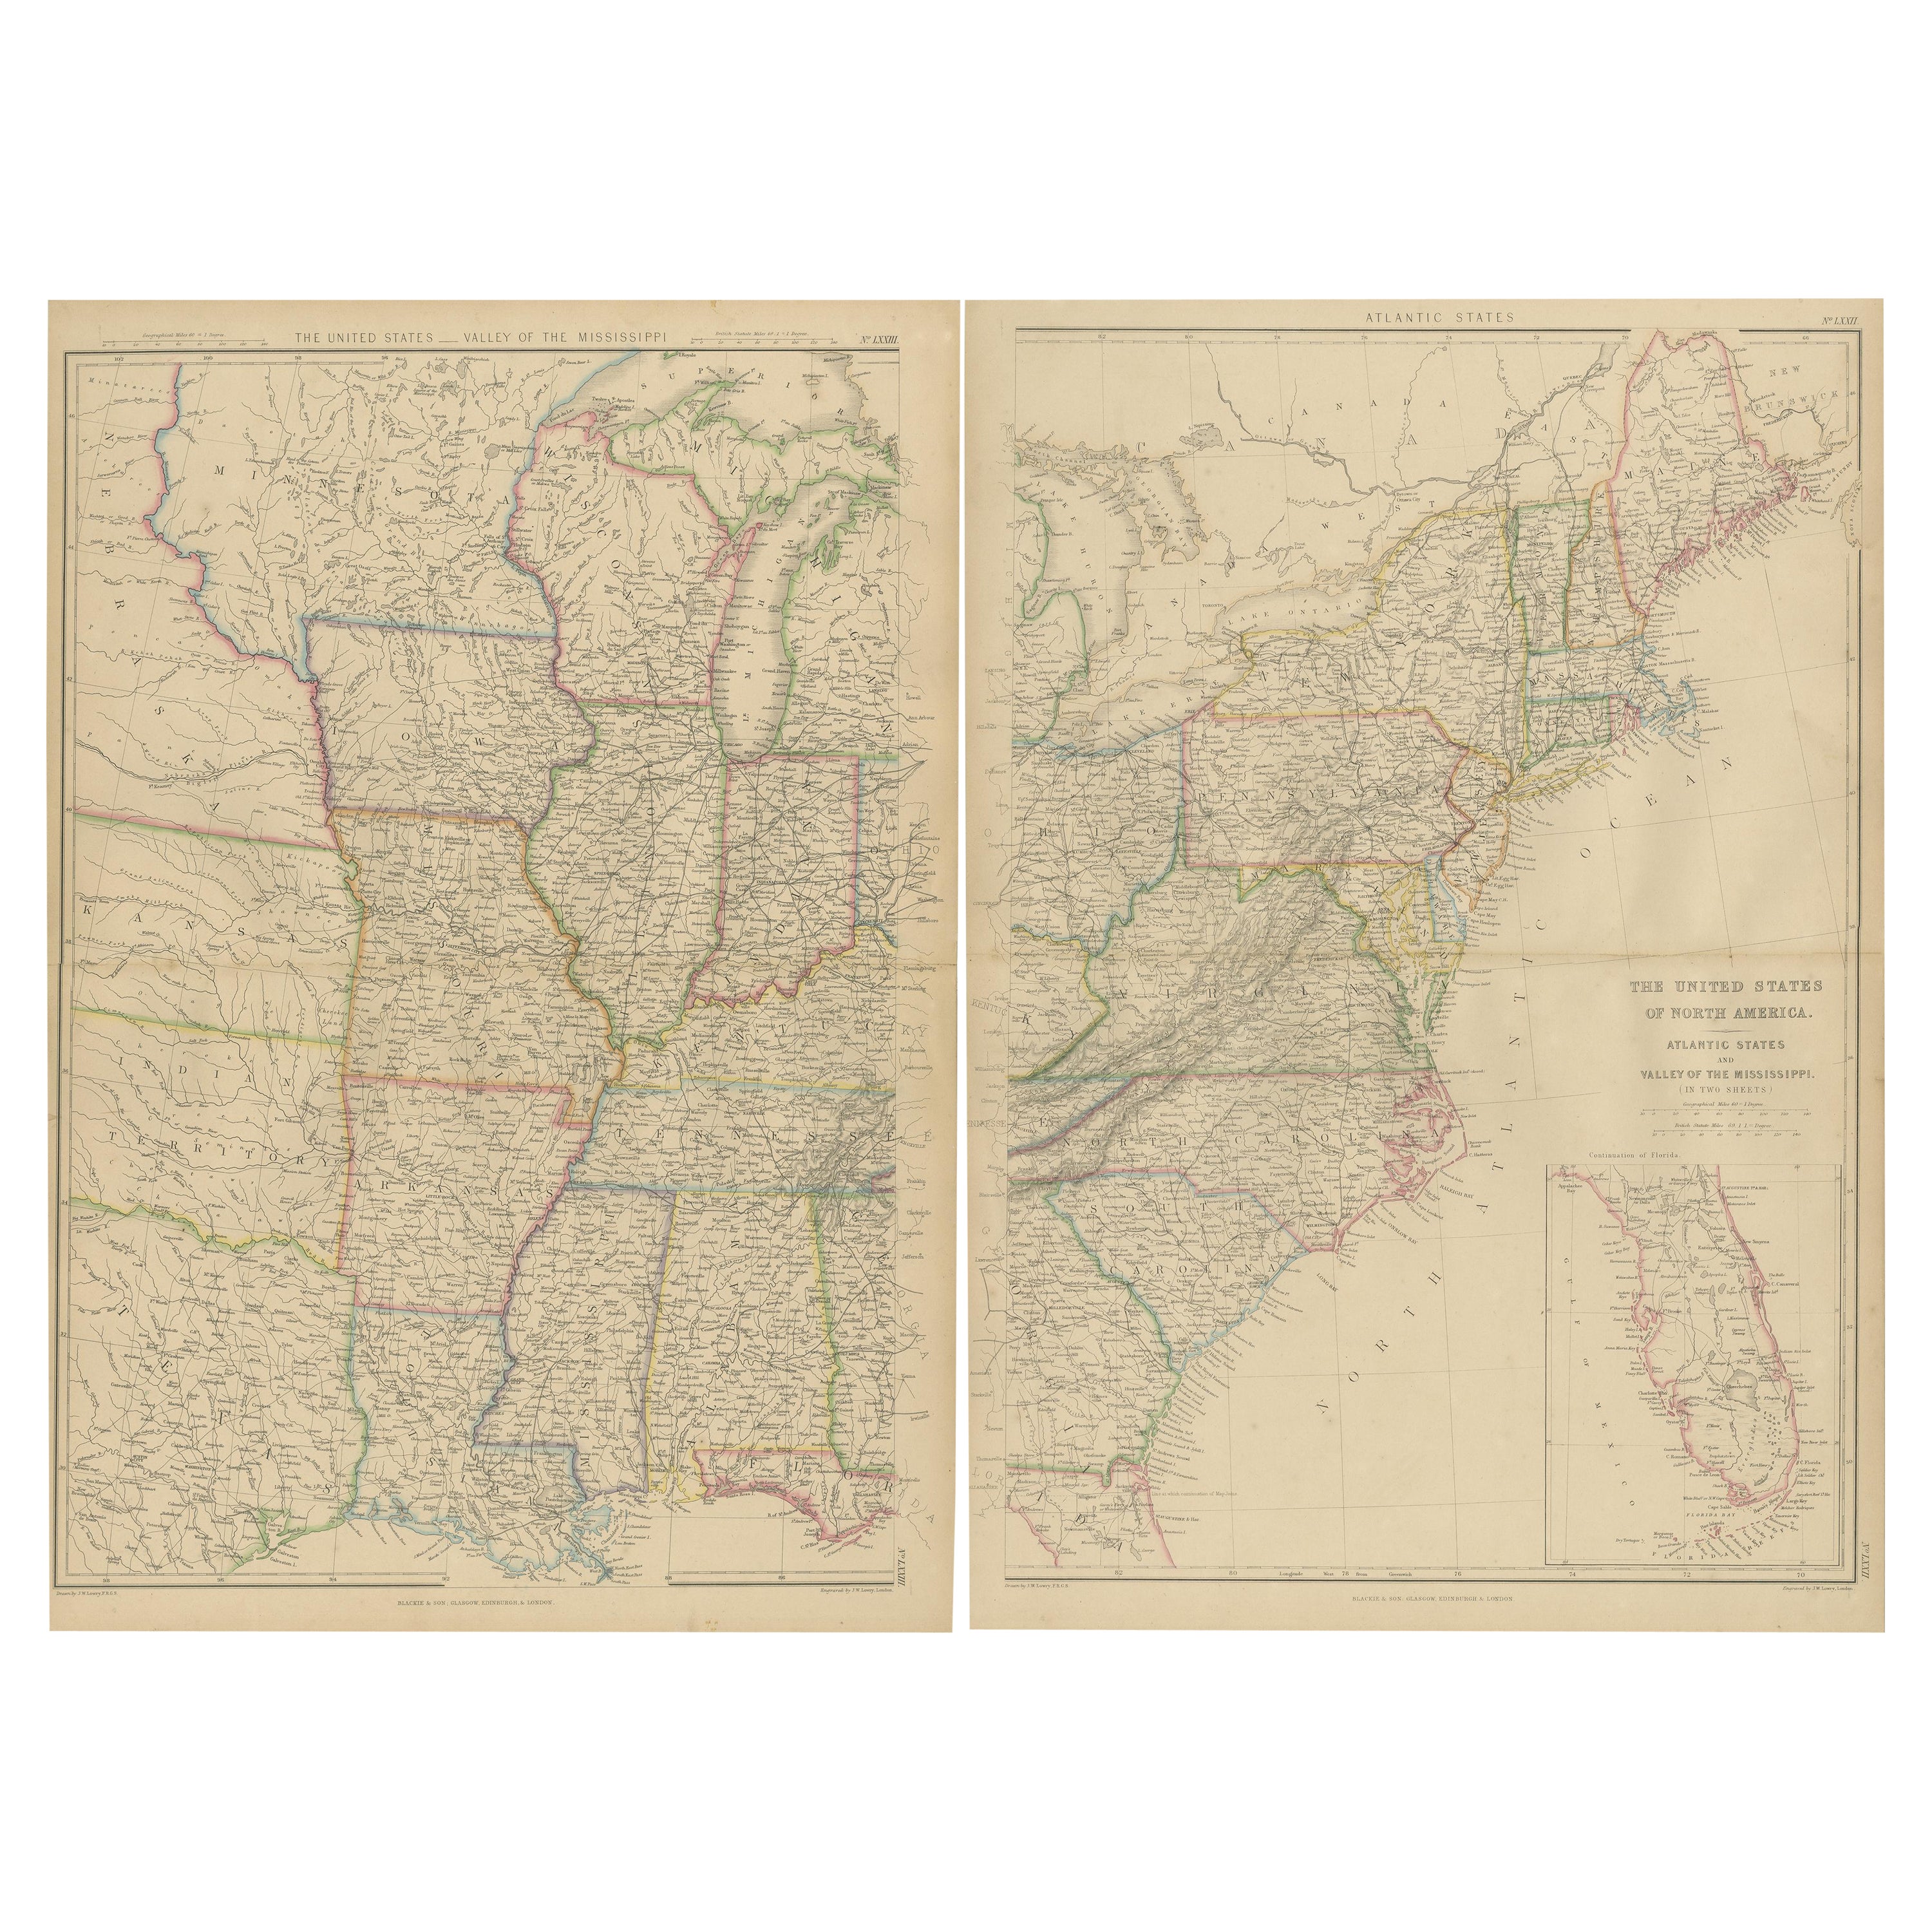 Set of 2 Antique Maps of the United States by W. G. Blackie, 1859